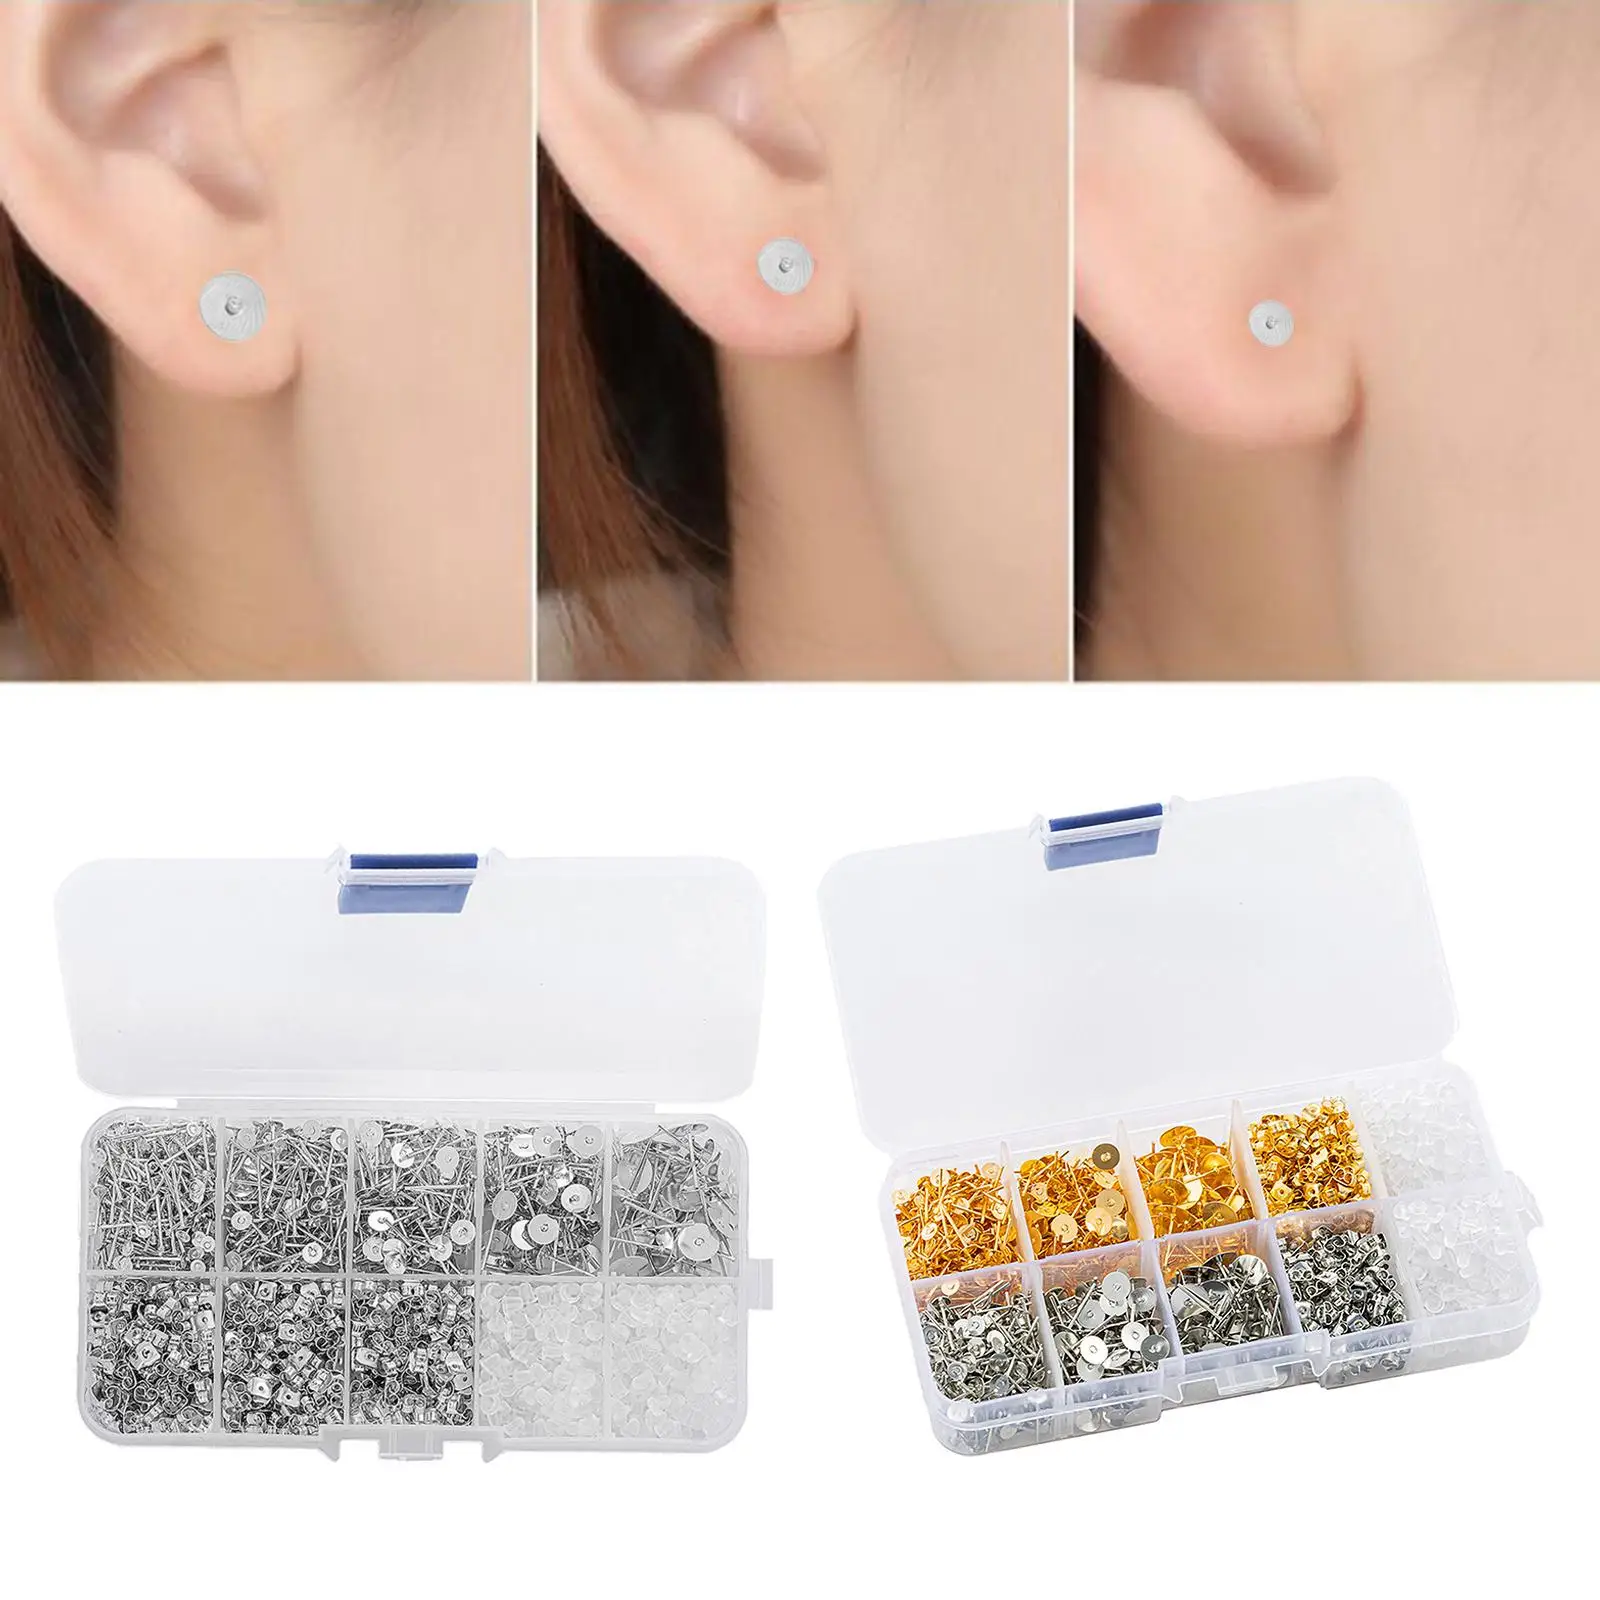  Earrings Flat-Bottomed  Kit for Jewelry Making DIY Crafting